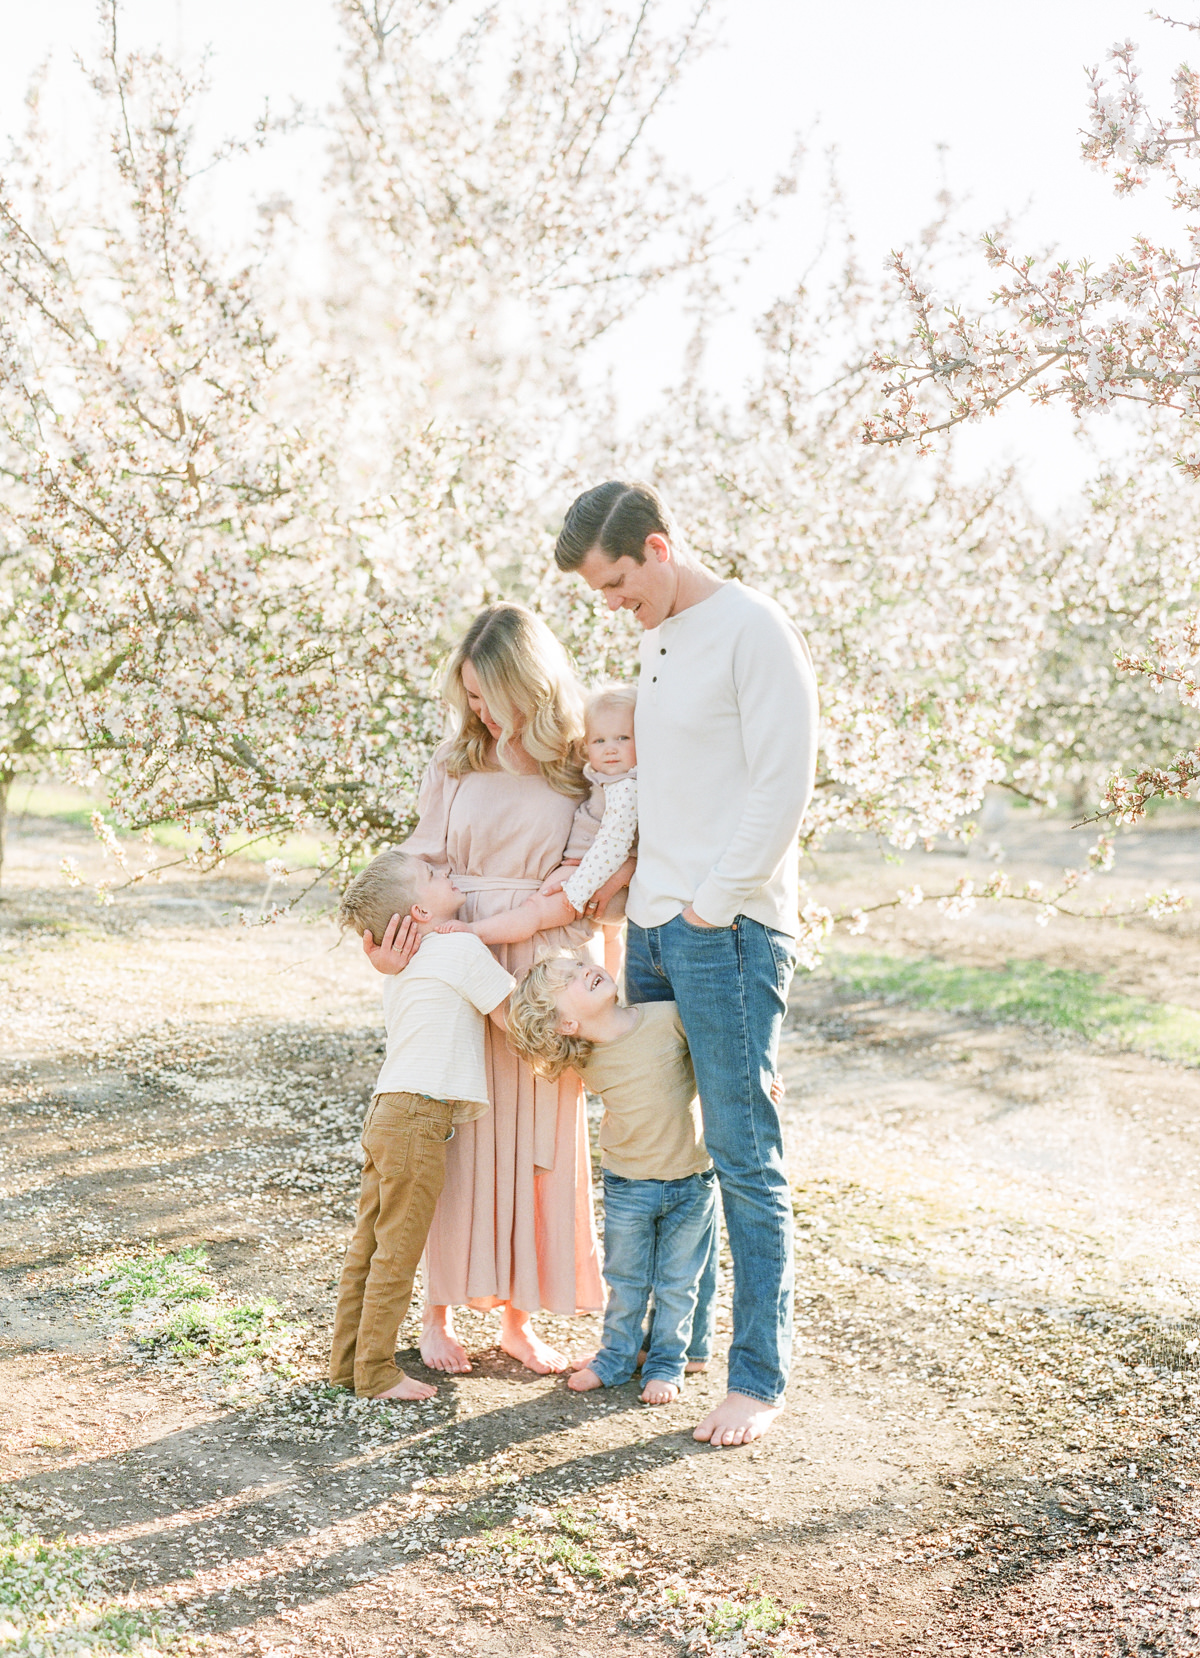 Central Valley Family Session, Almond Grove, Family Photography on Film, What to Wear for Family Photos, Light and Airy